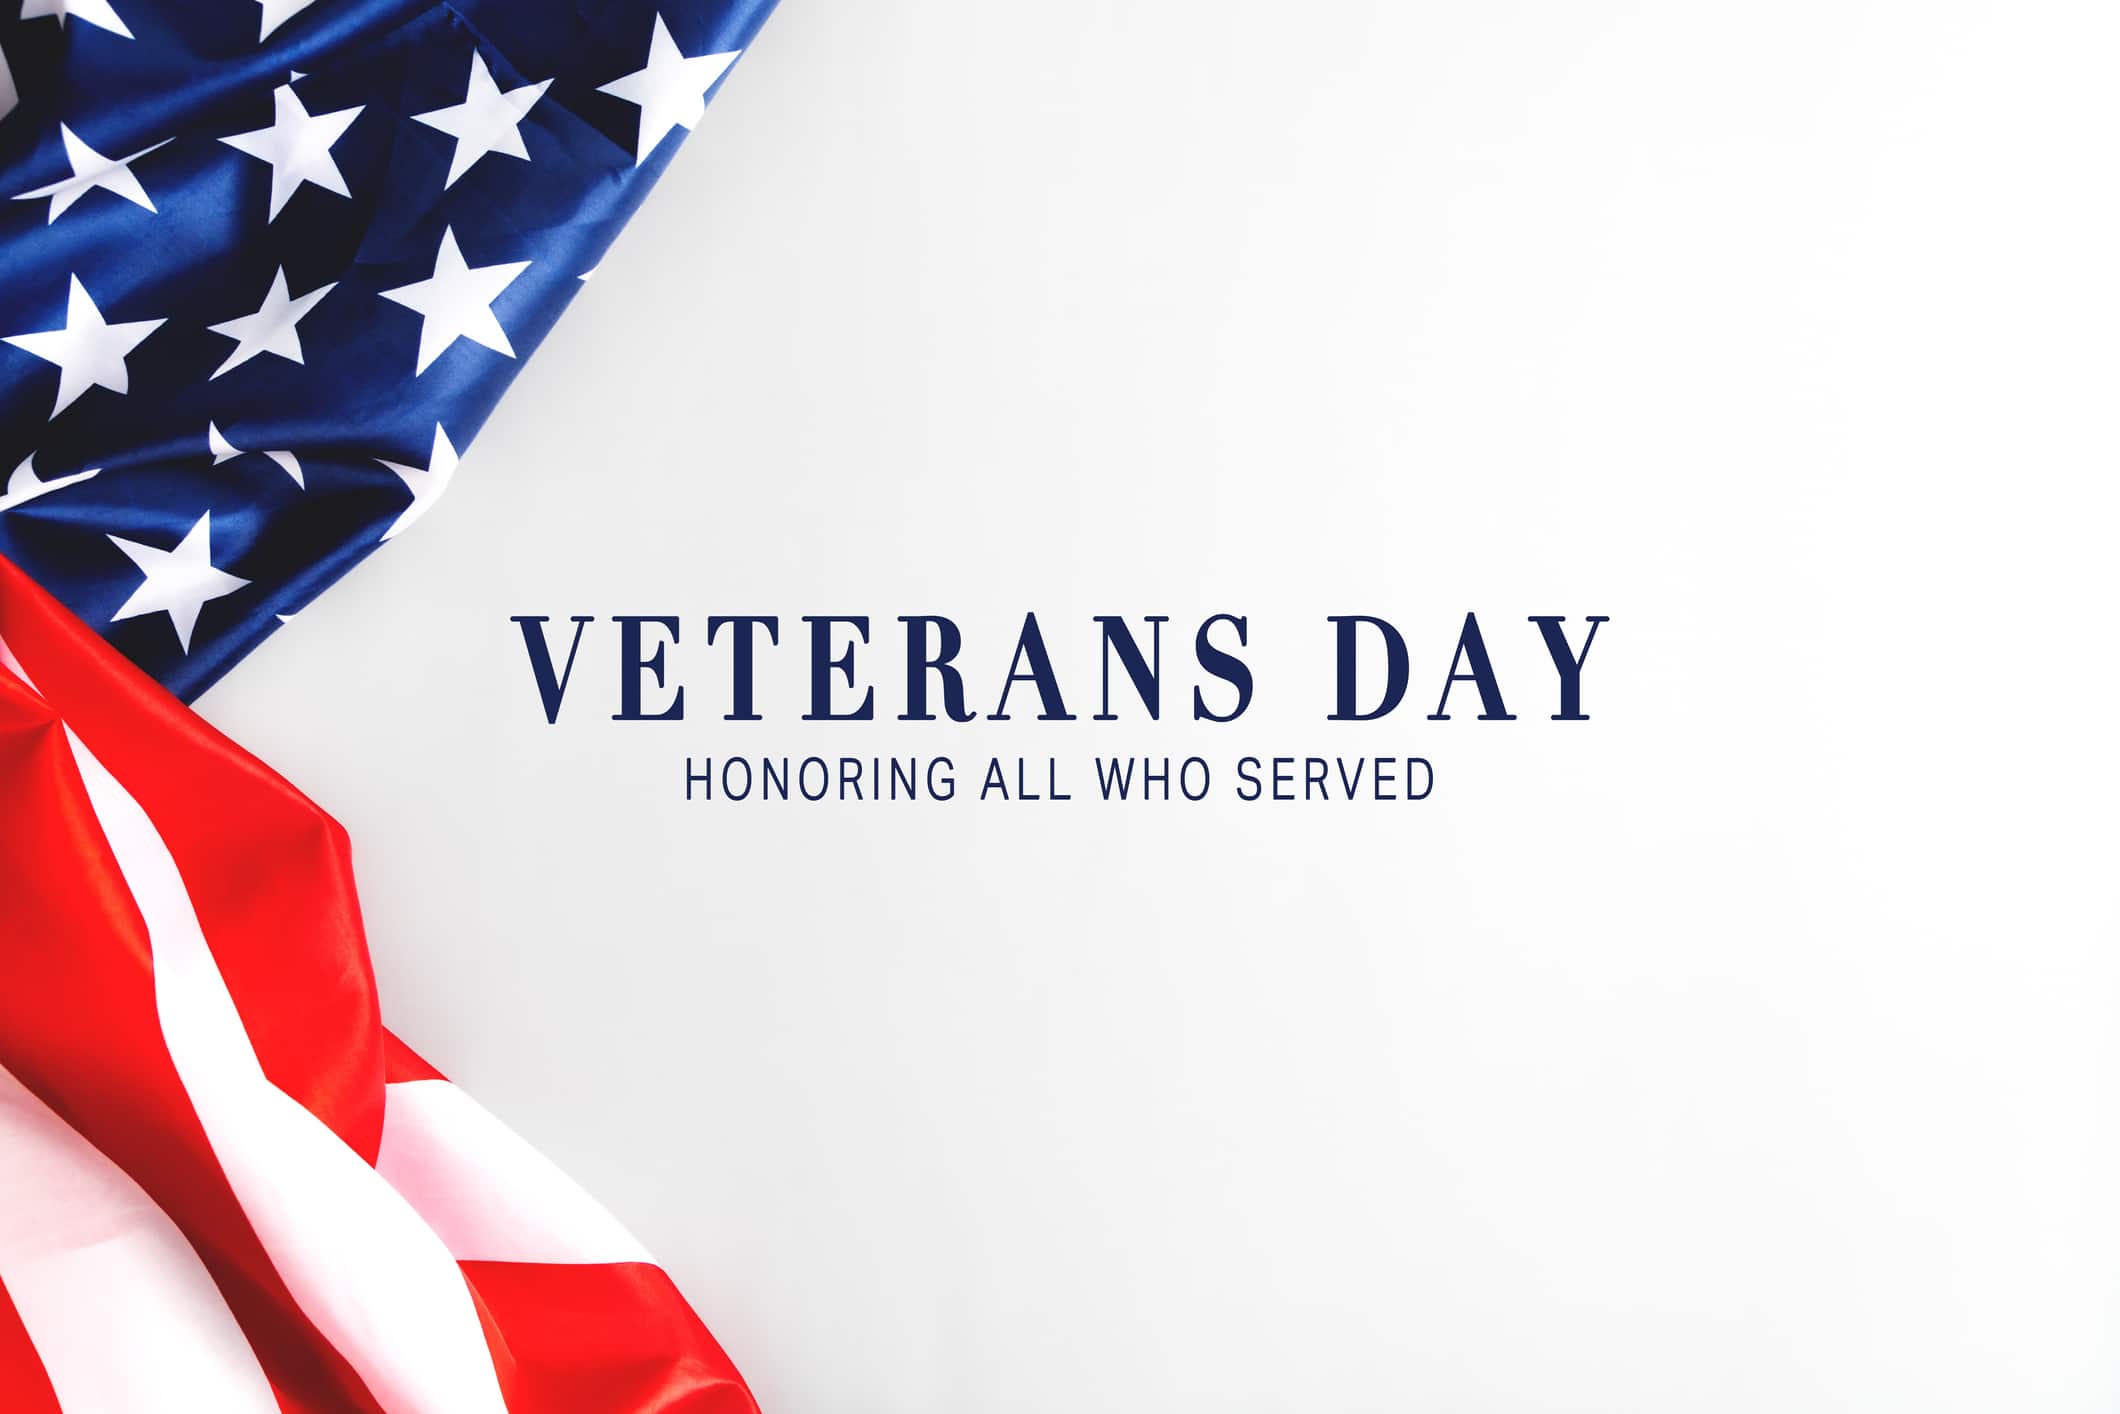 This Veterans Day We Honor Those Who've Proudly Served Our Nation